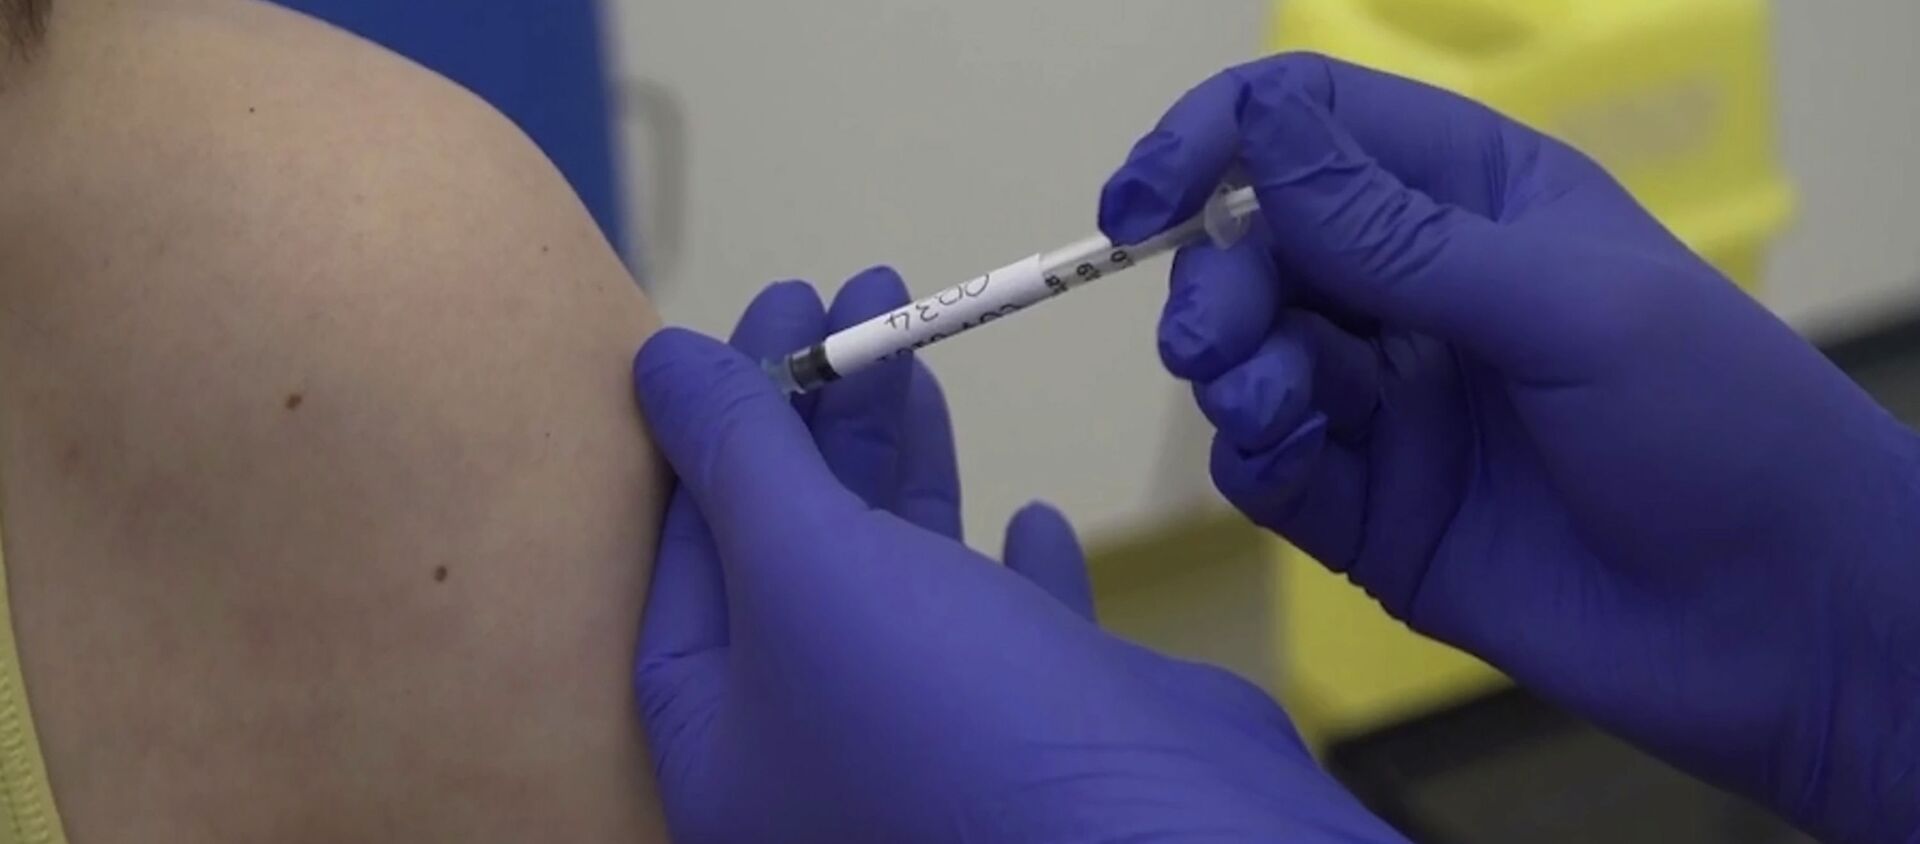 Screen grab taken from video issued by Britain's Oxford University, showing microbiologist Elisa Granato, being injected as part of the first human trials in the UK for a potential coronavirus vaccine, untaken by Oxford University, England, Thursday April 23, 2020 - Sputnik International, 1920